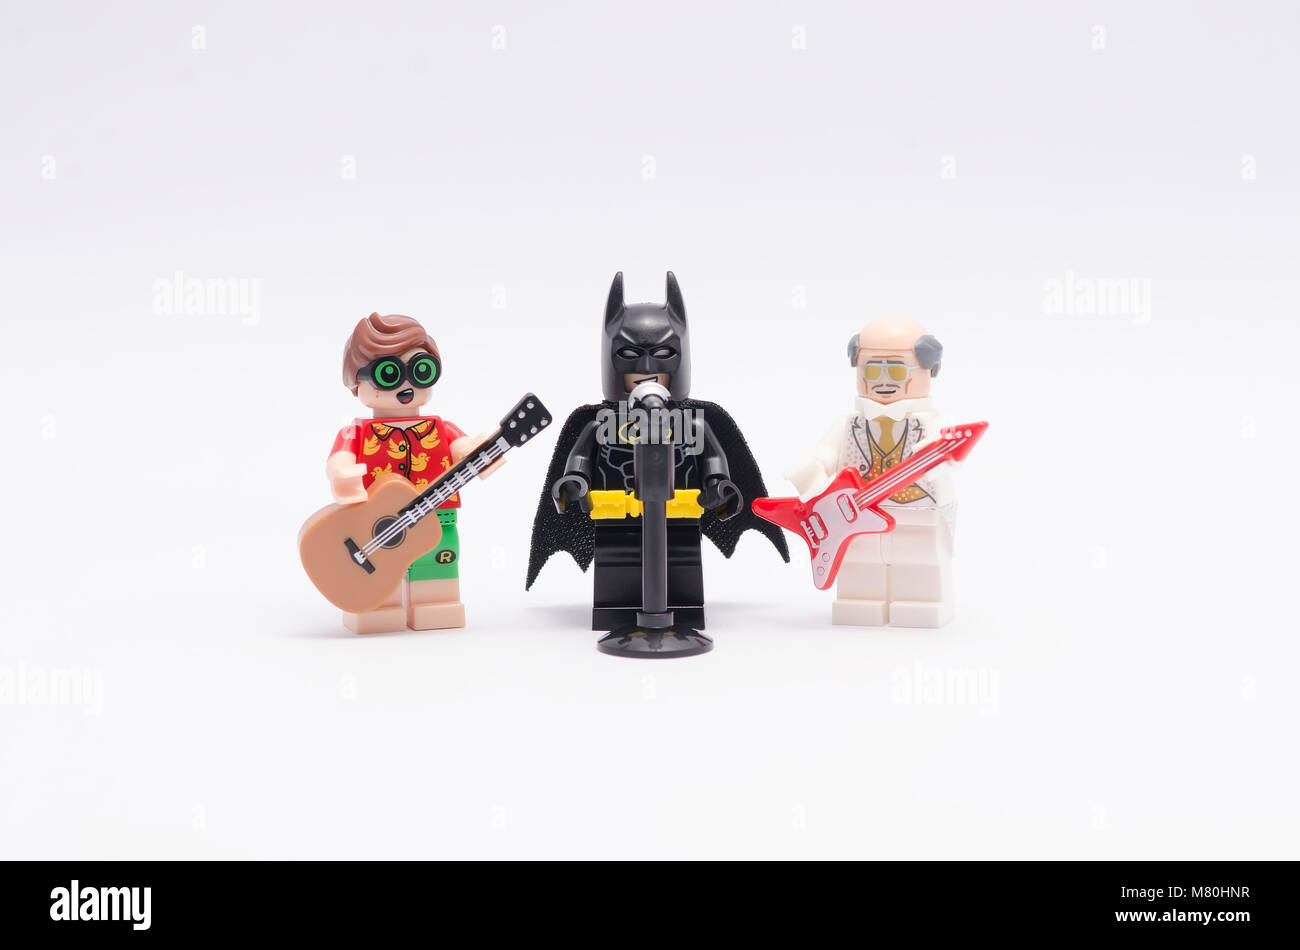 lego batman singing with alfred and robin play the guitar. isolated on  white background Stock Photo - Alamy